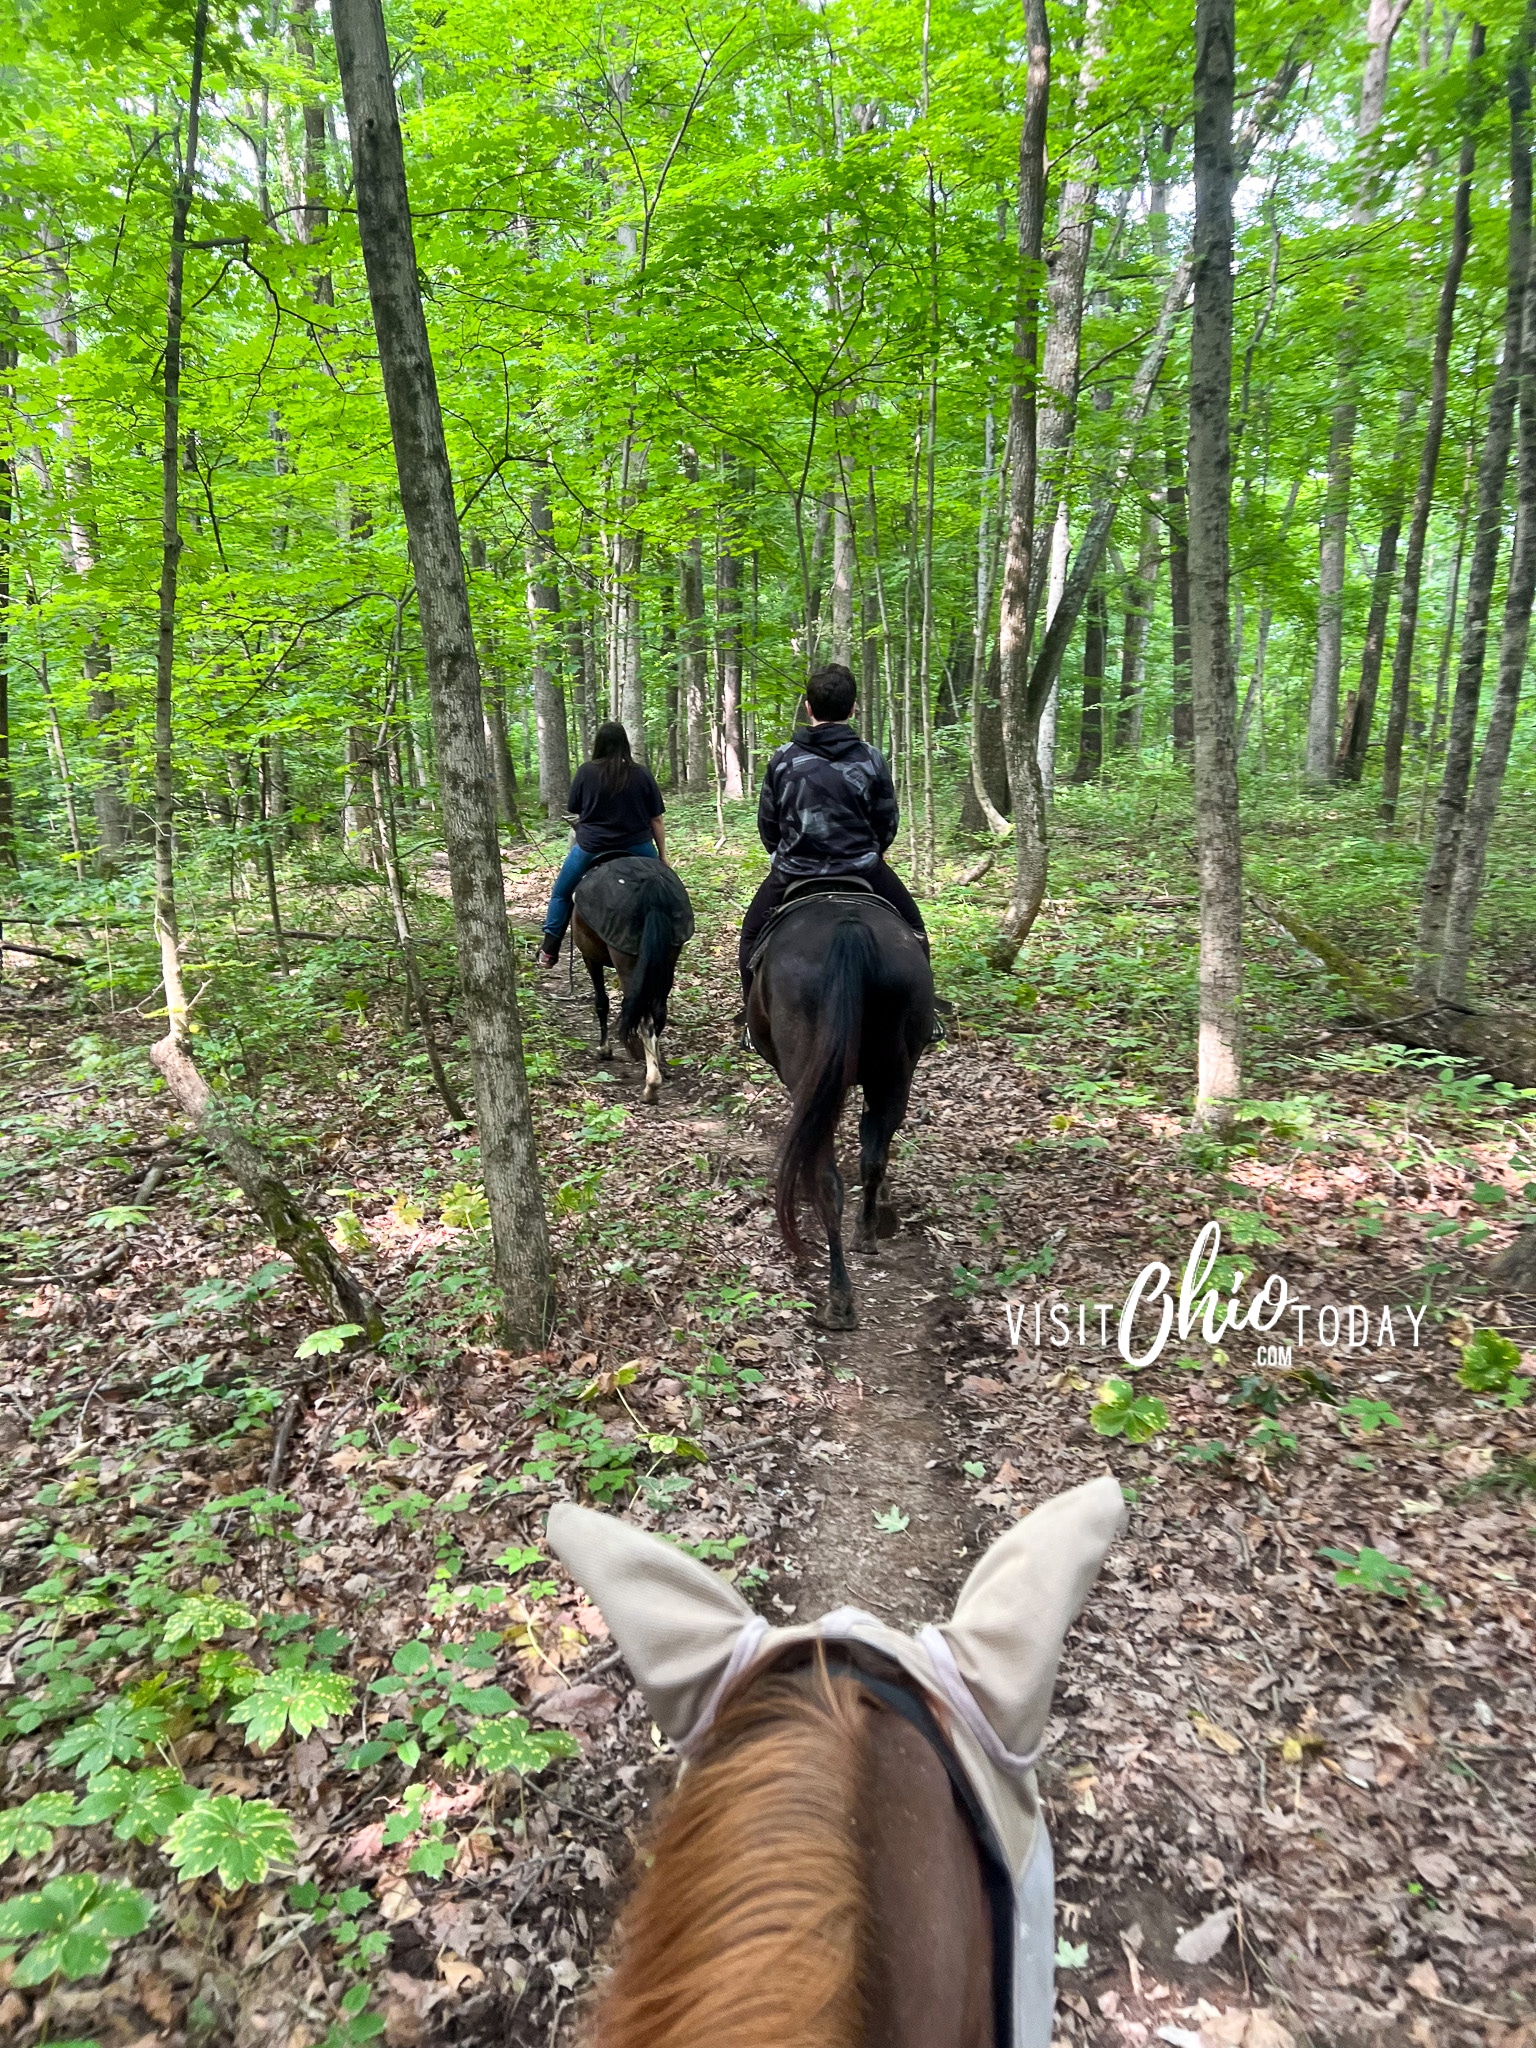 vertical photo of two riders on a trail through the Zaleski State Forest with Uncle Buck's Stables. Photo credit: Cindy Gordon of VisitOhioToday.com